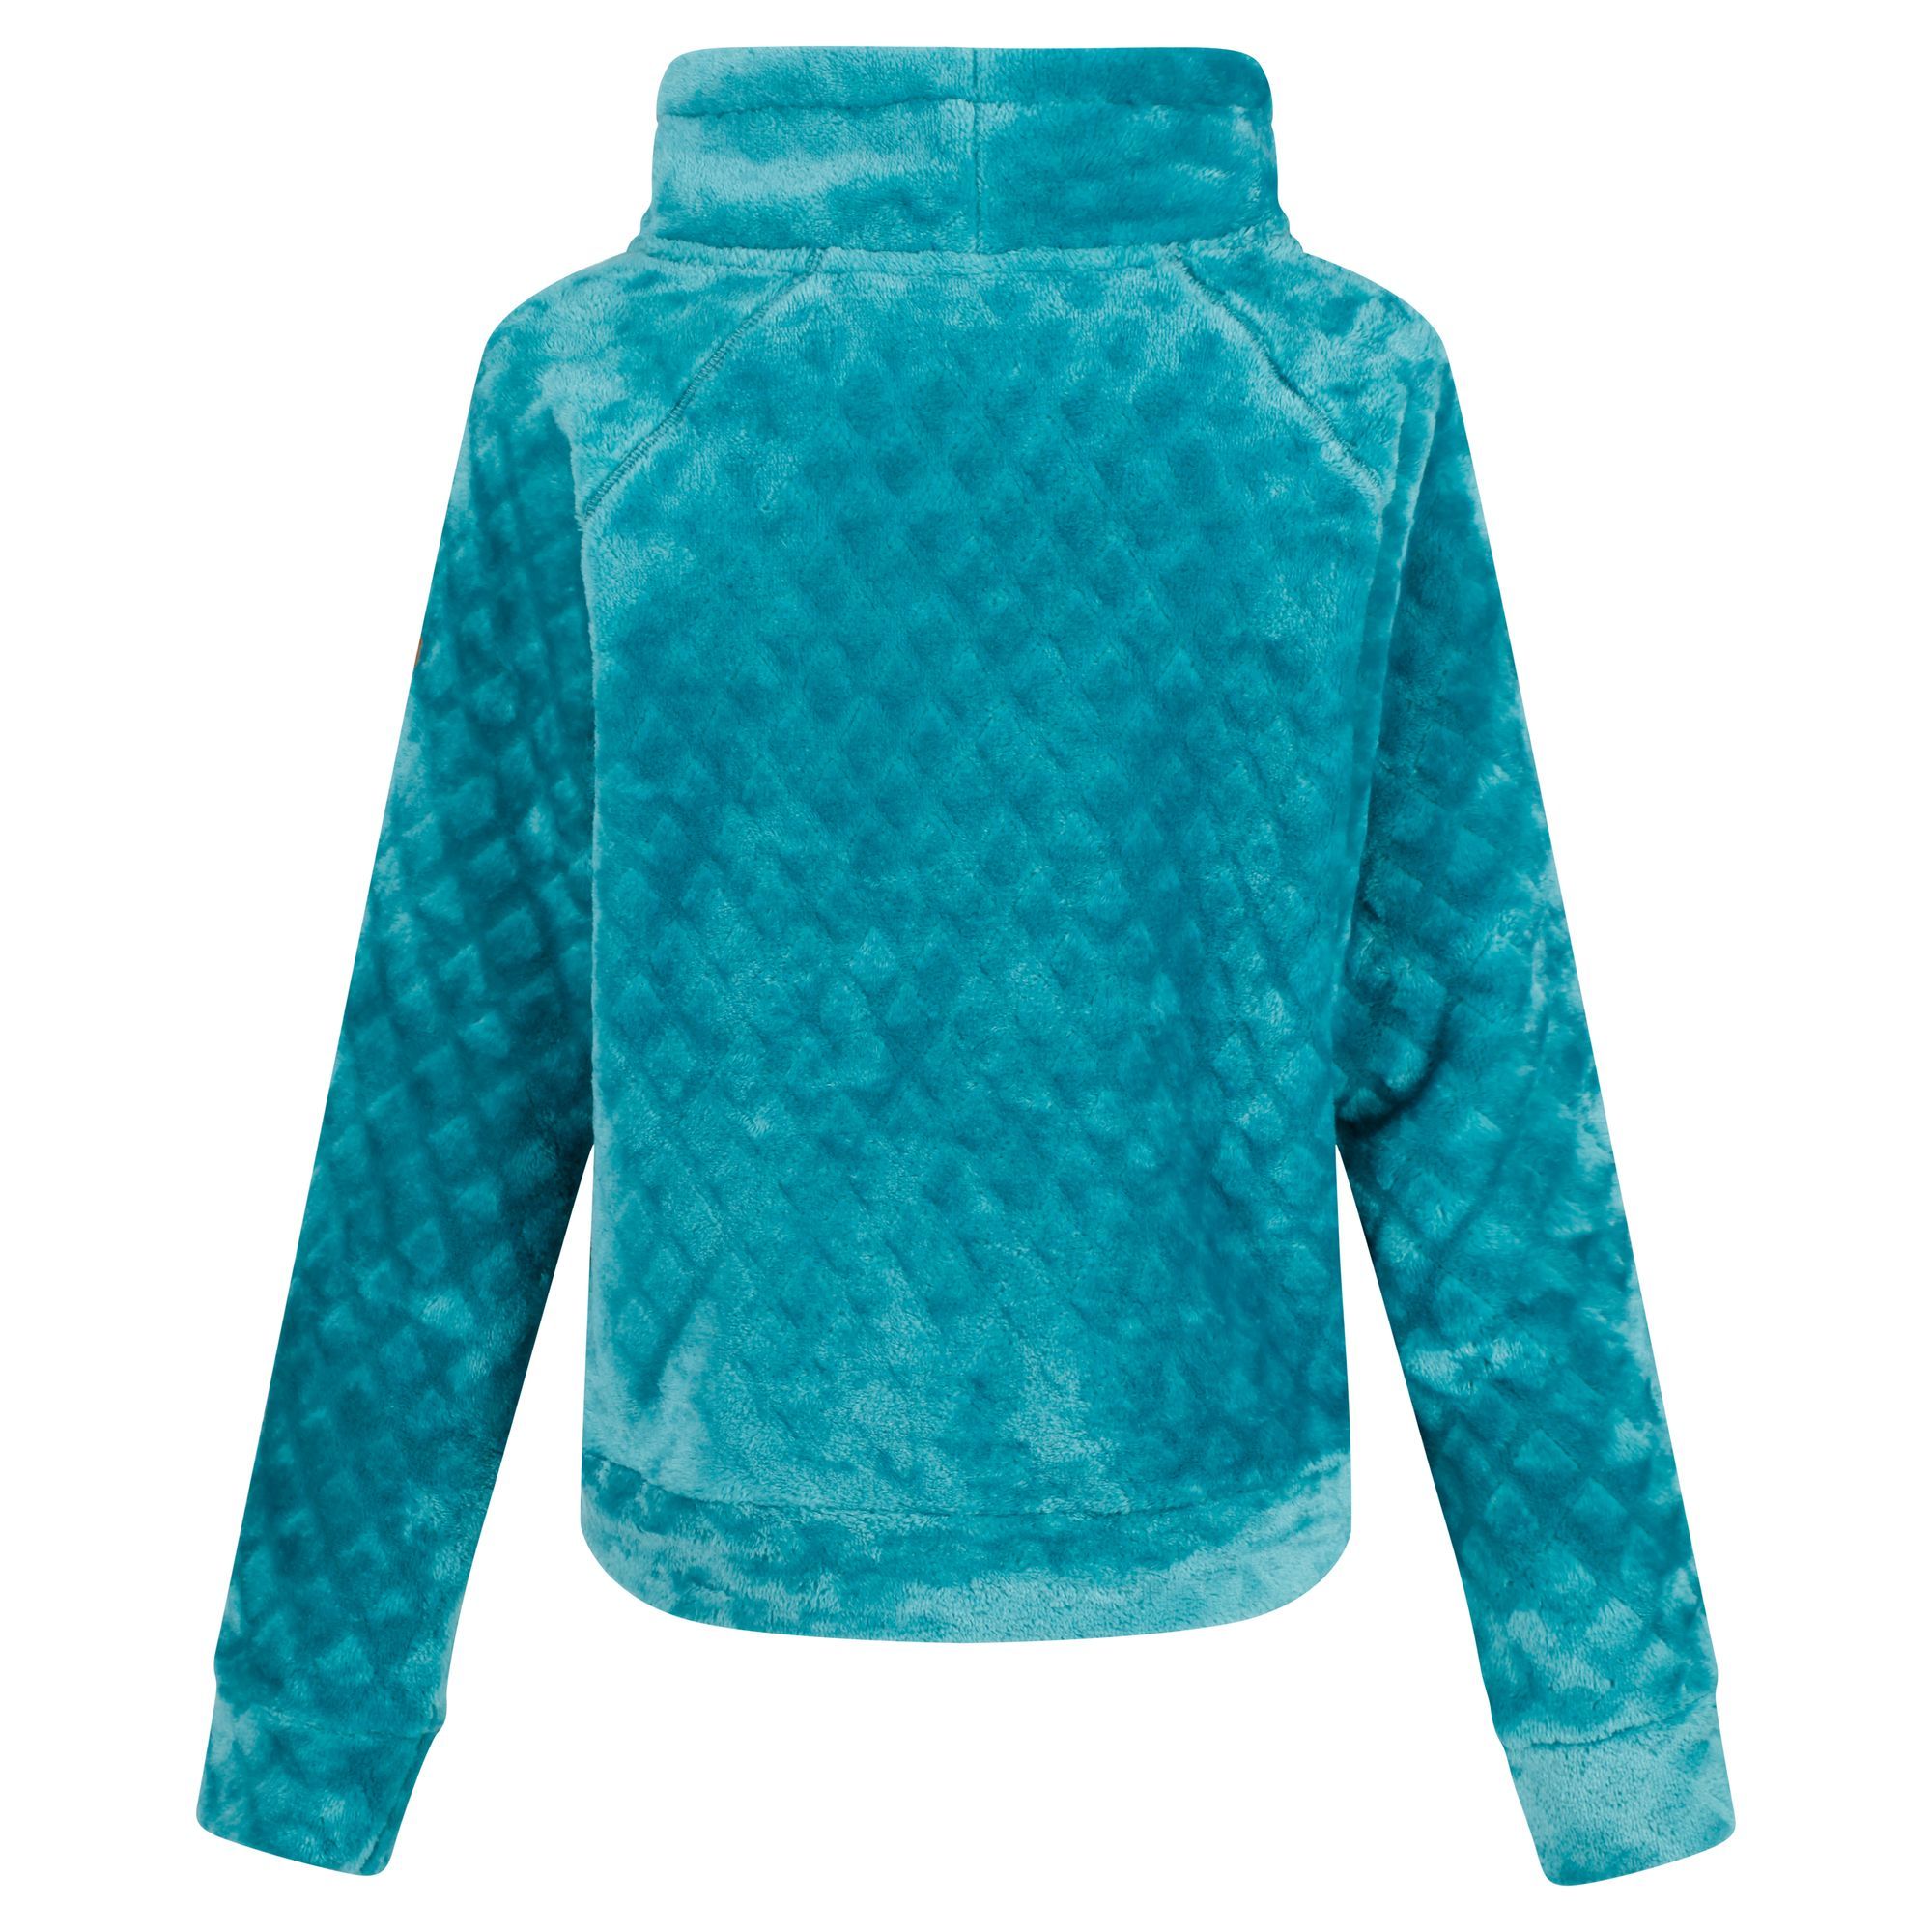 100% polyester diamond high pile fleece. Cowl neck style. Fixed drawcord detail.